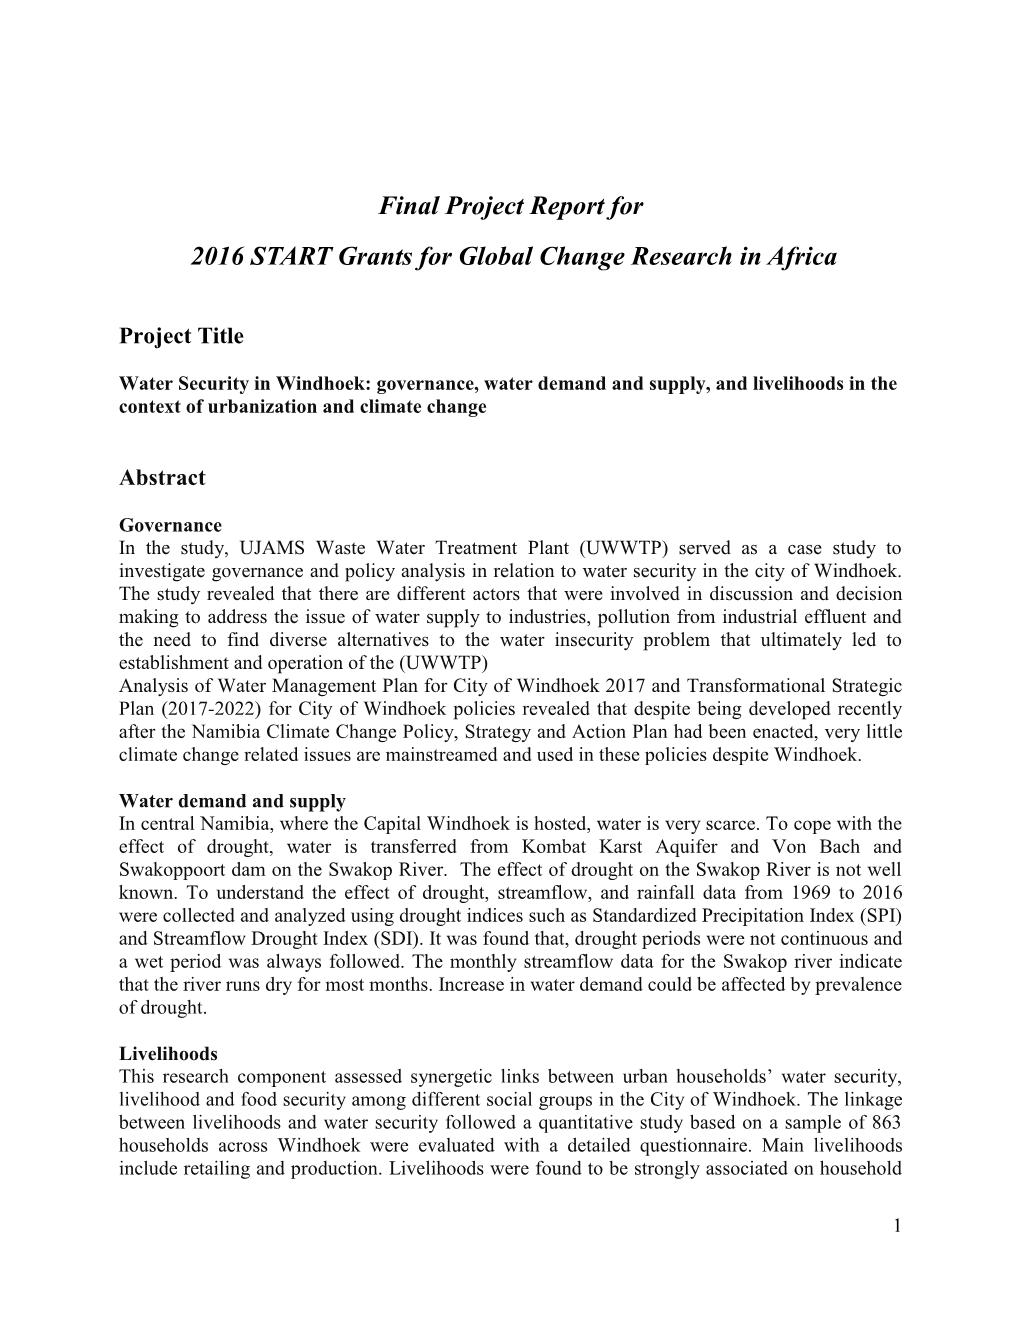 Final Project Report for 2016 START Grants for Global Change Research in Africa